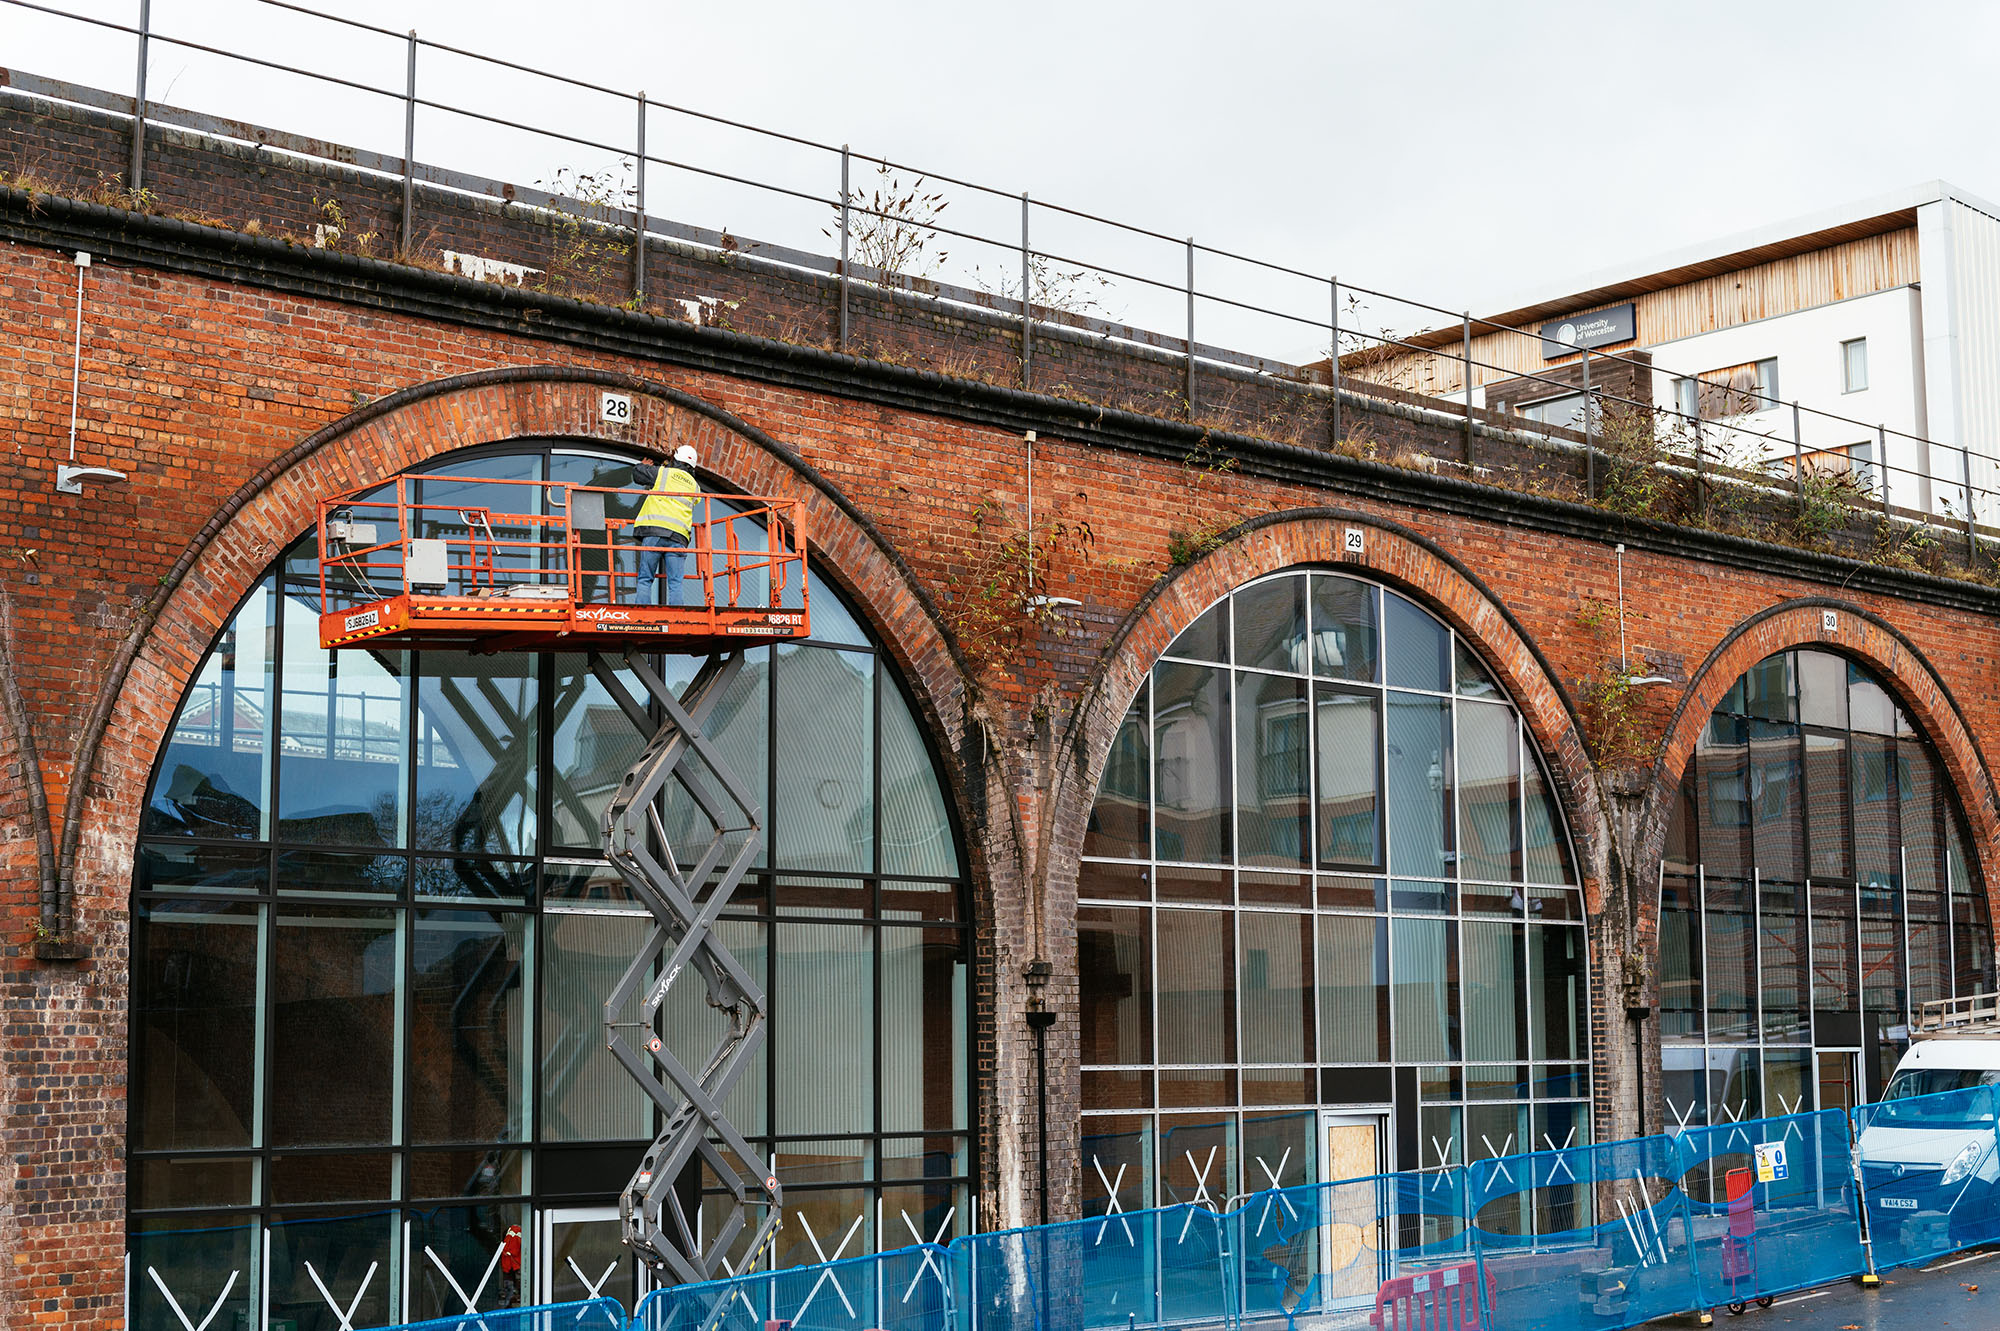 A worker on a raised platform working on the outside of the Arches